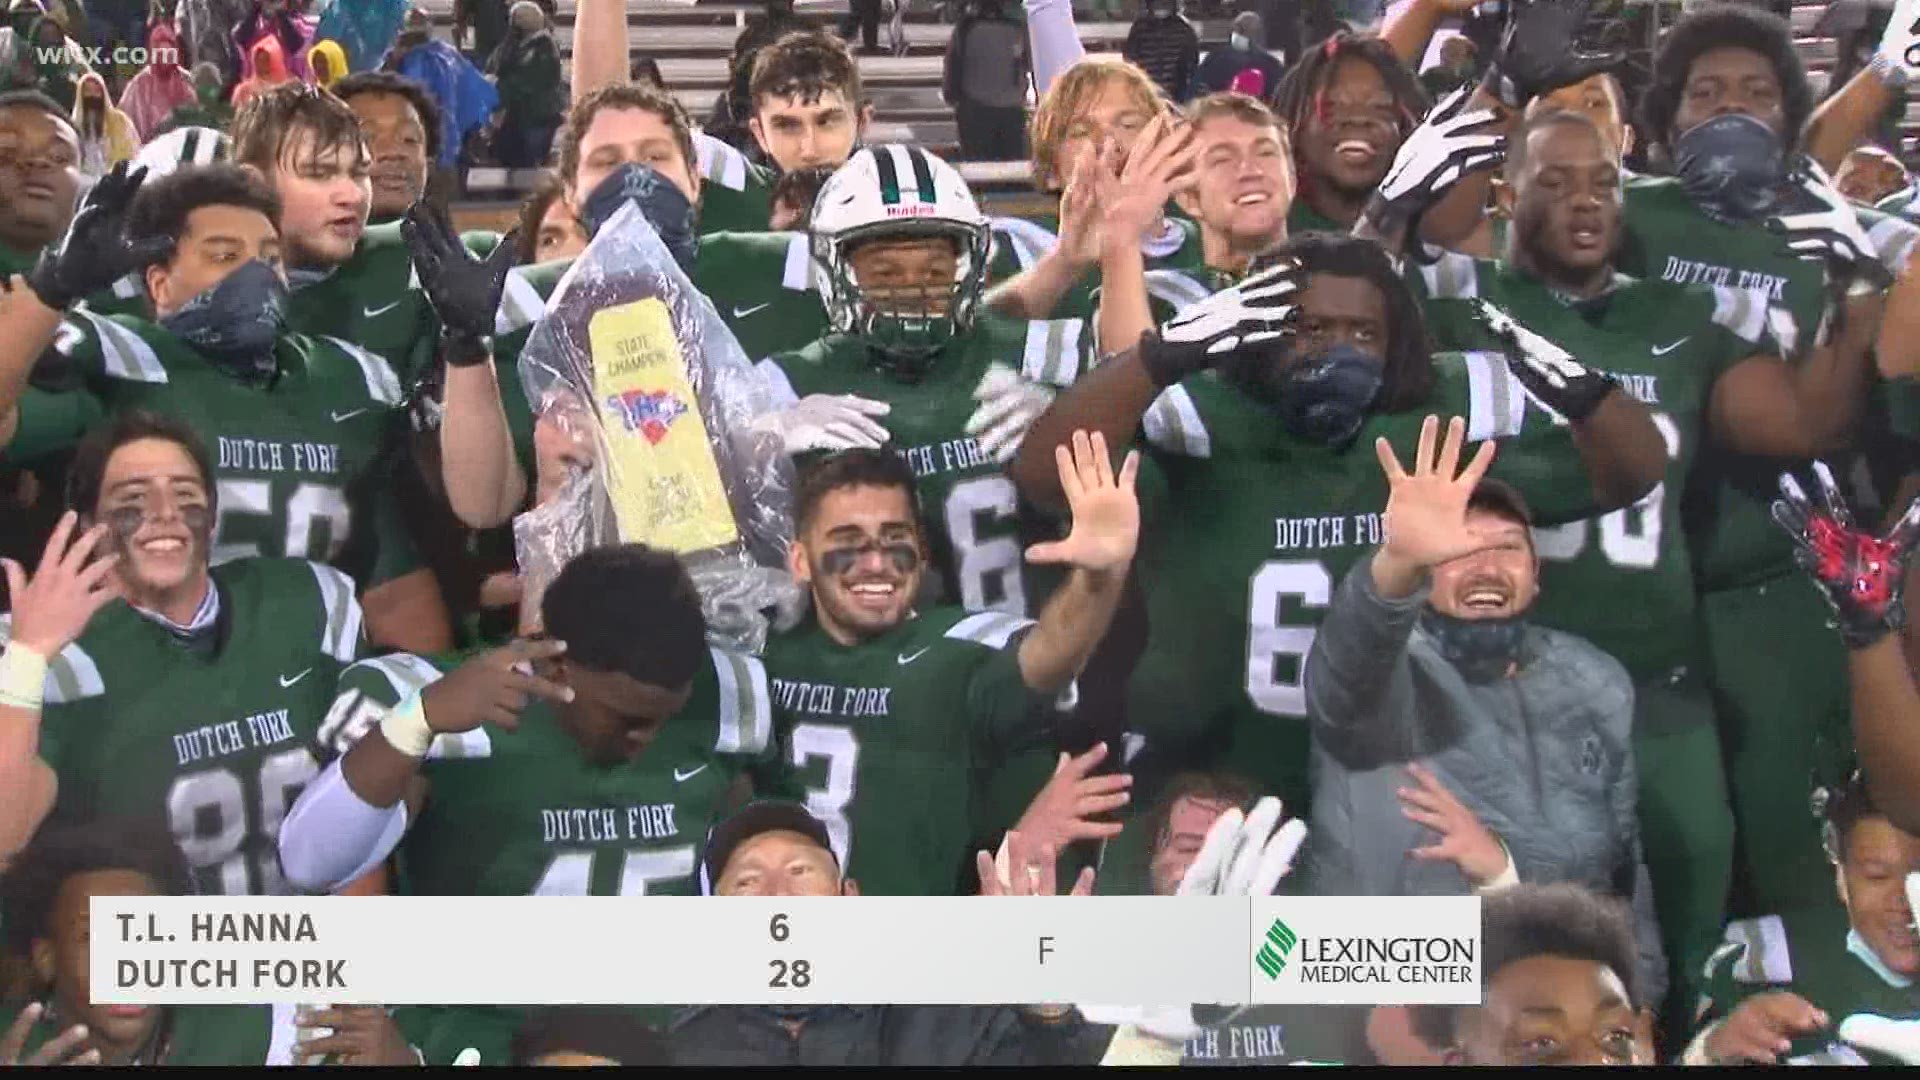 With the win, Dutch Fork earned a state-record 5th straight Class 5A title and racked up a 50th straight game without a loss.